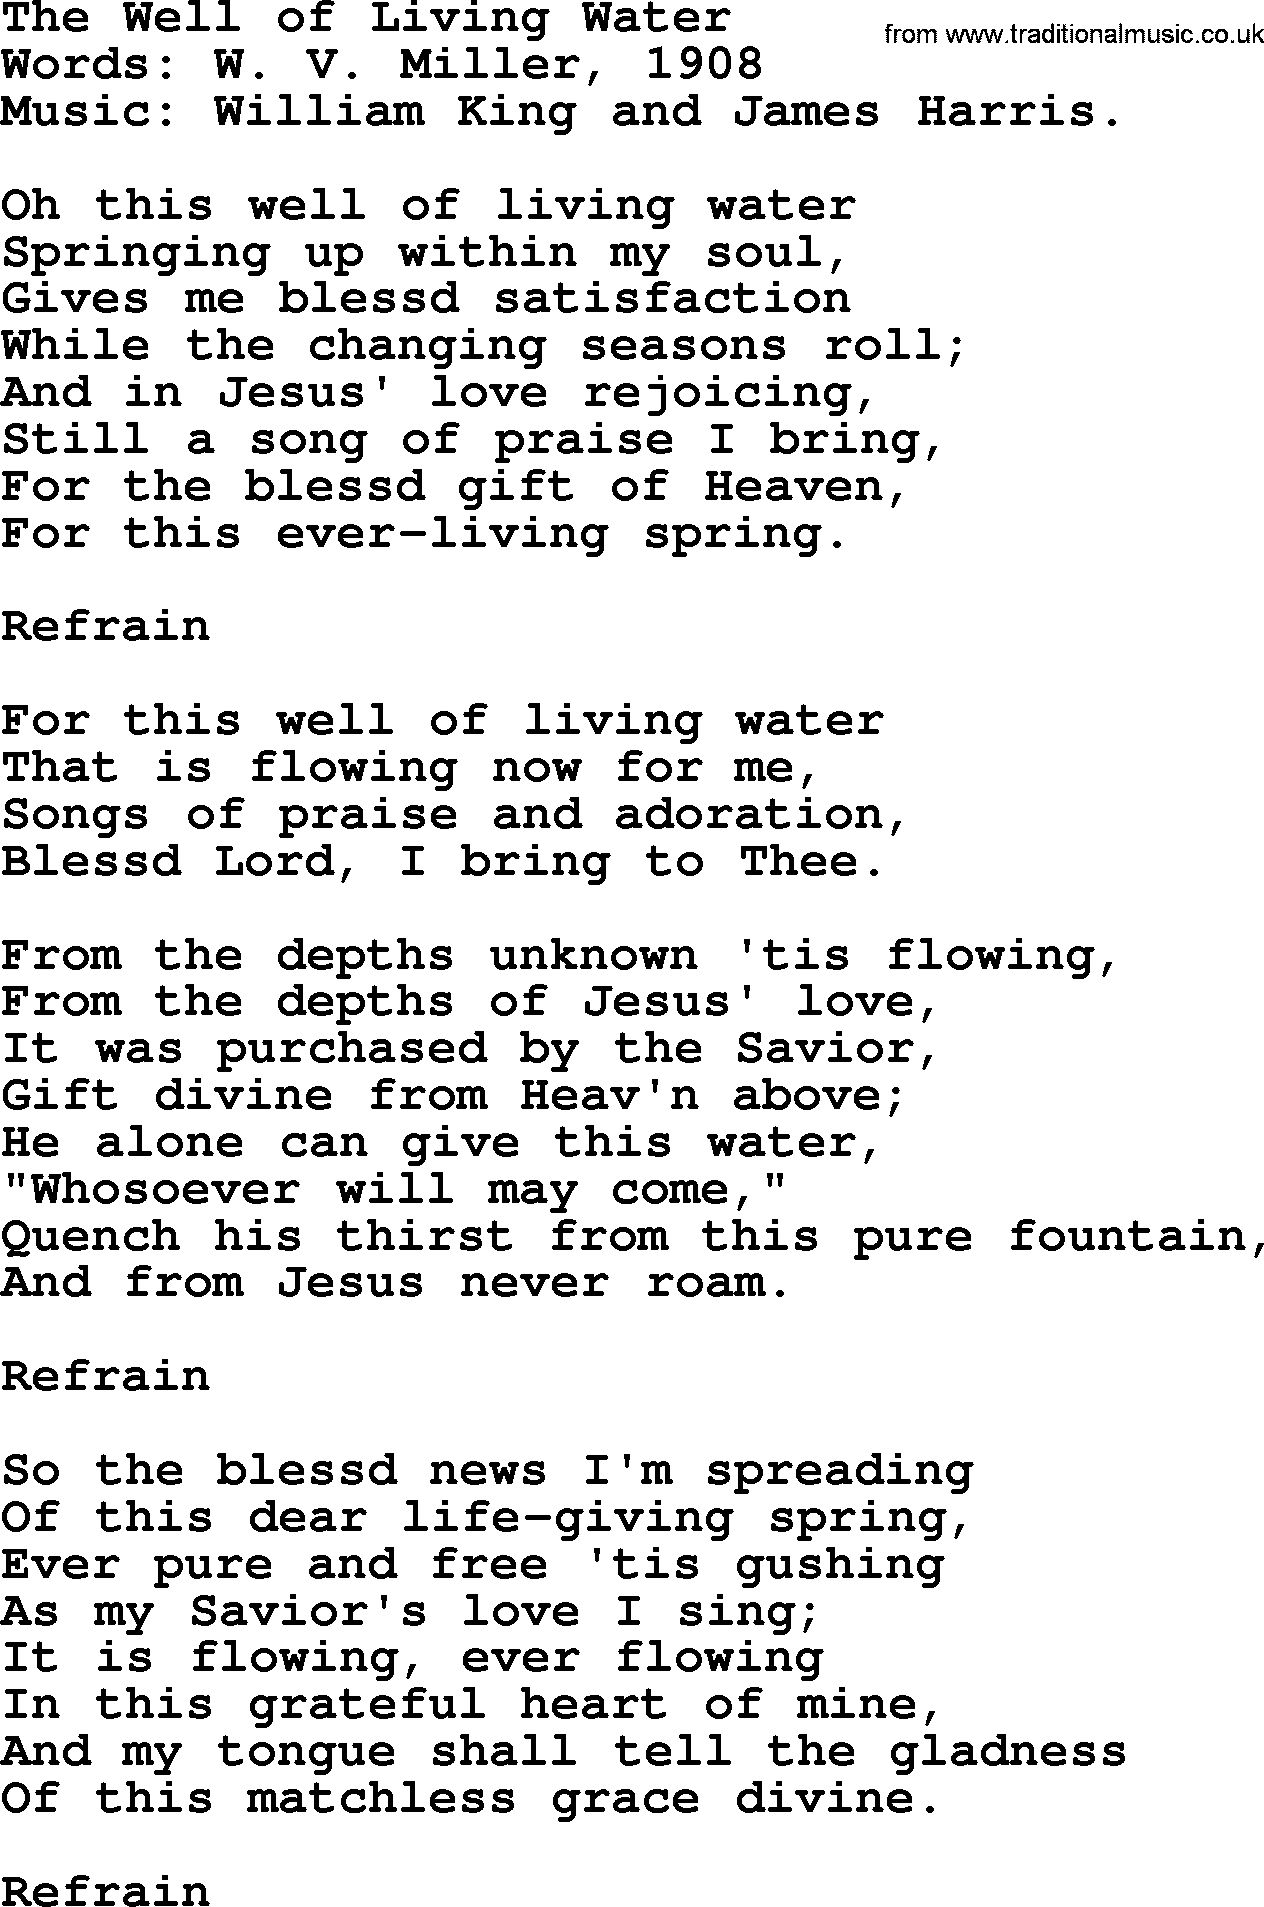 Songs and Hymns about Heaven: The Well Of Living Water lyrics with PDF